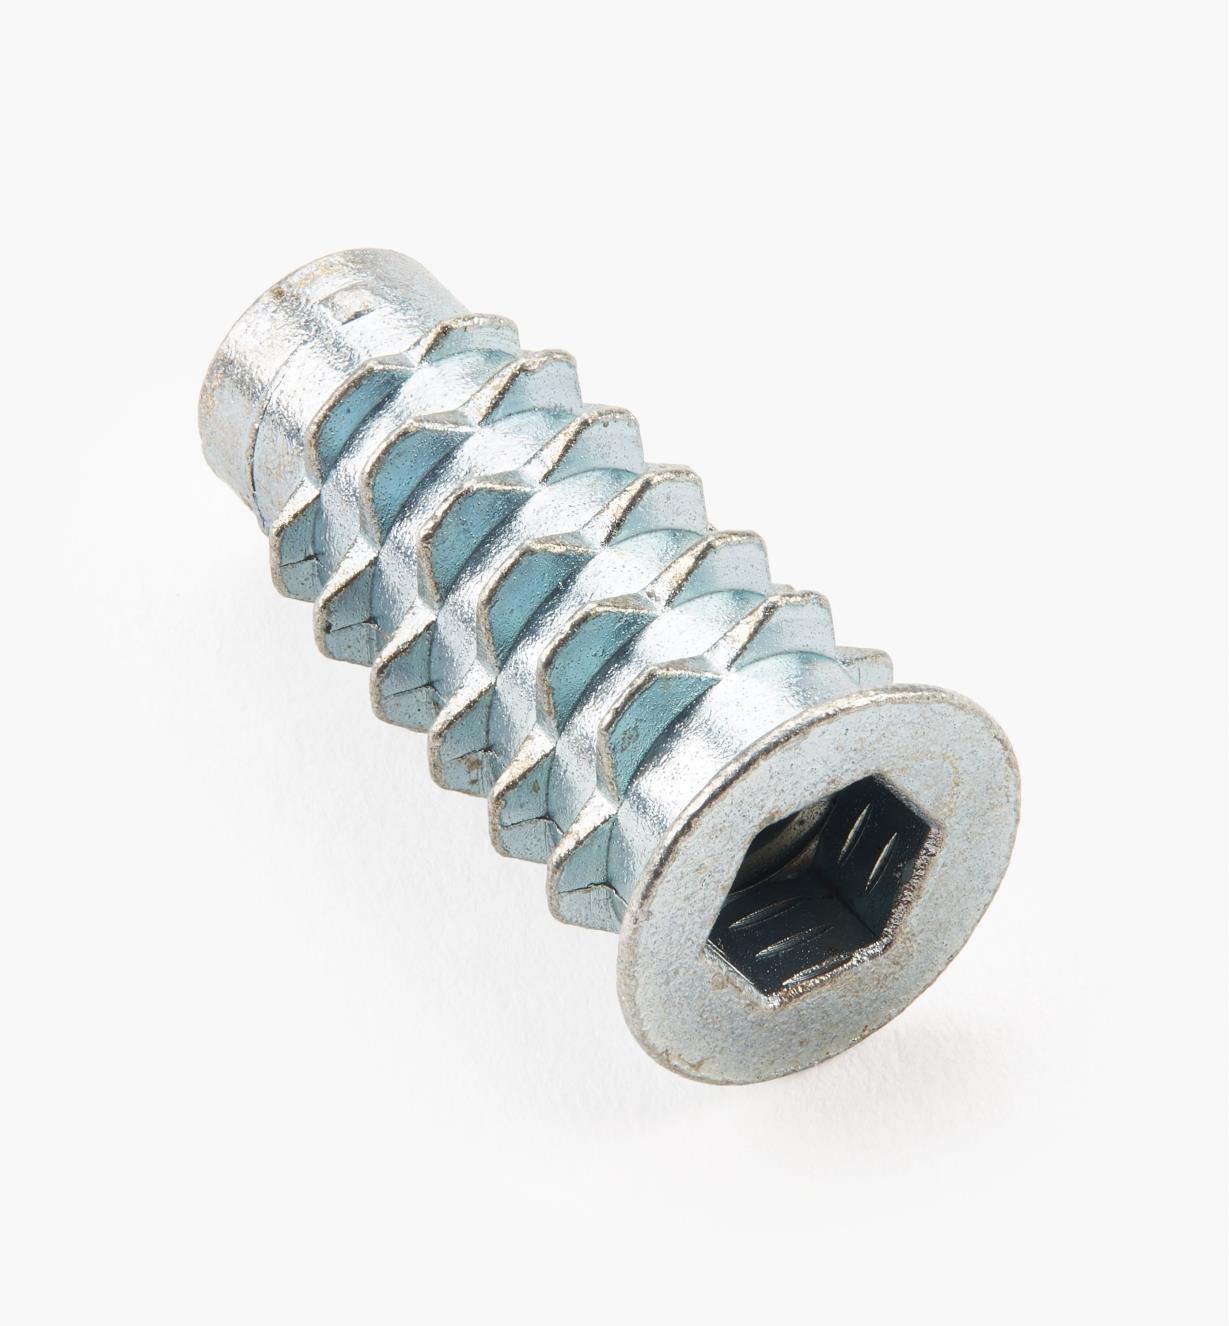 00N1025 - 25mm Flanged Nut, 1/4 20 Quick-Connect